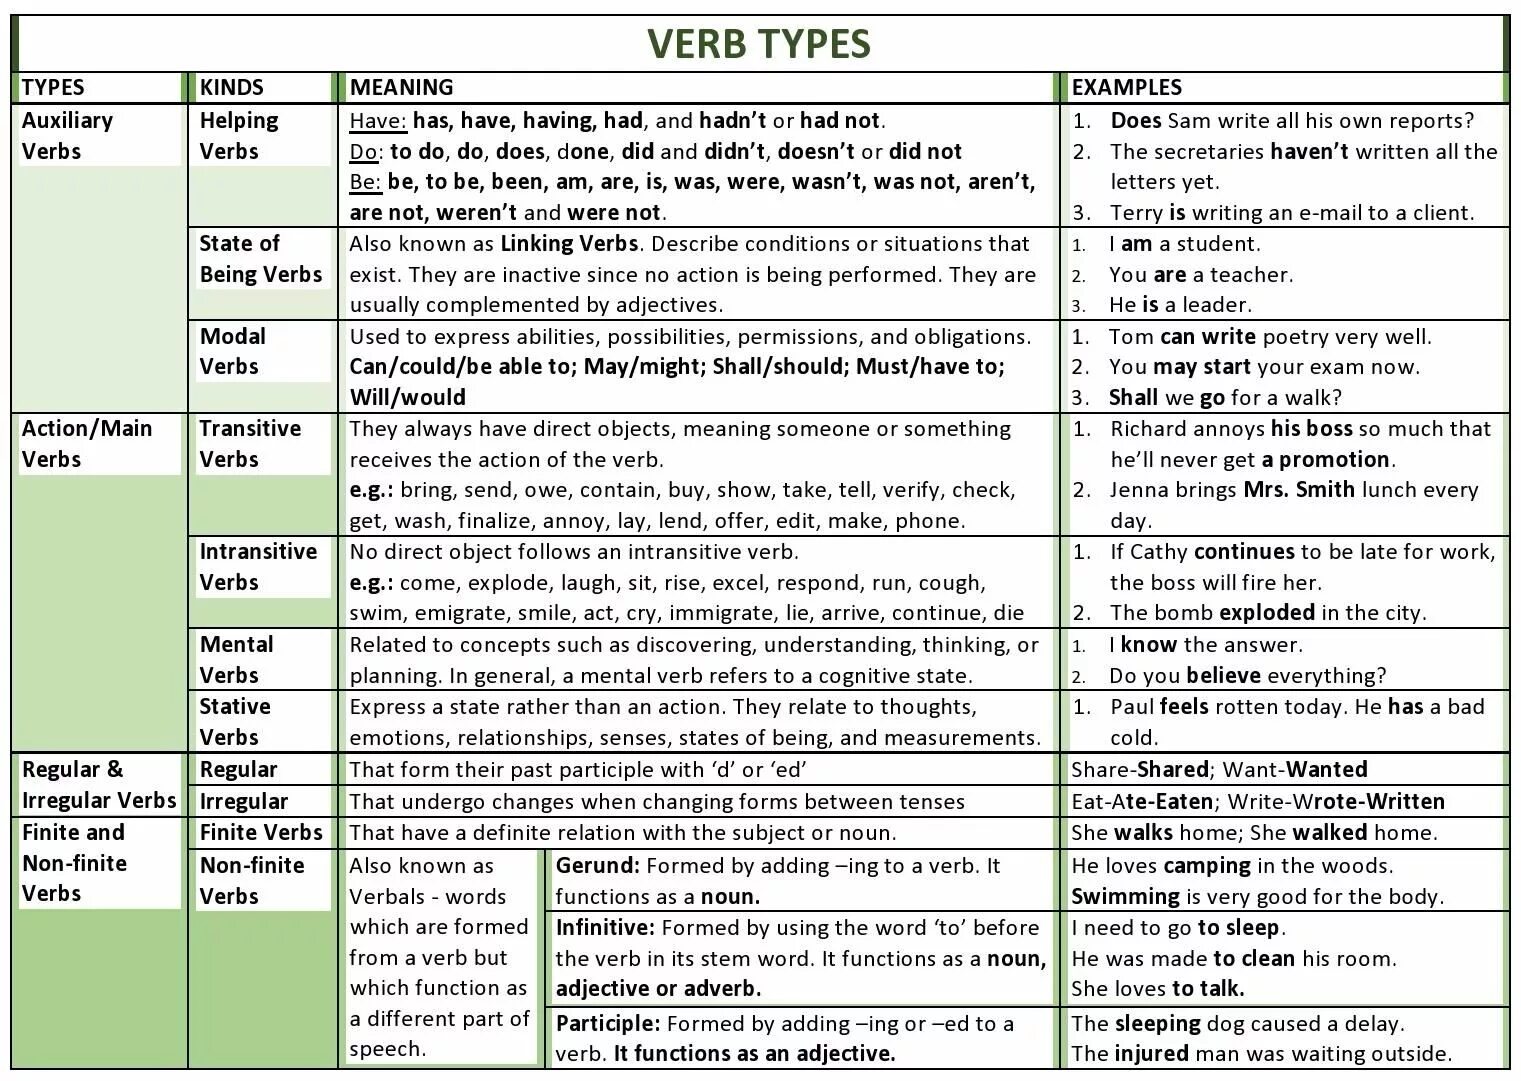 Active since. Types of verbs. Types of verbs in English. Auxiliary verbs в английском. Kinds of verbs.